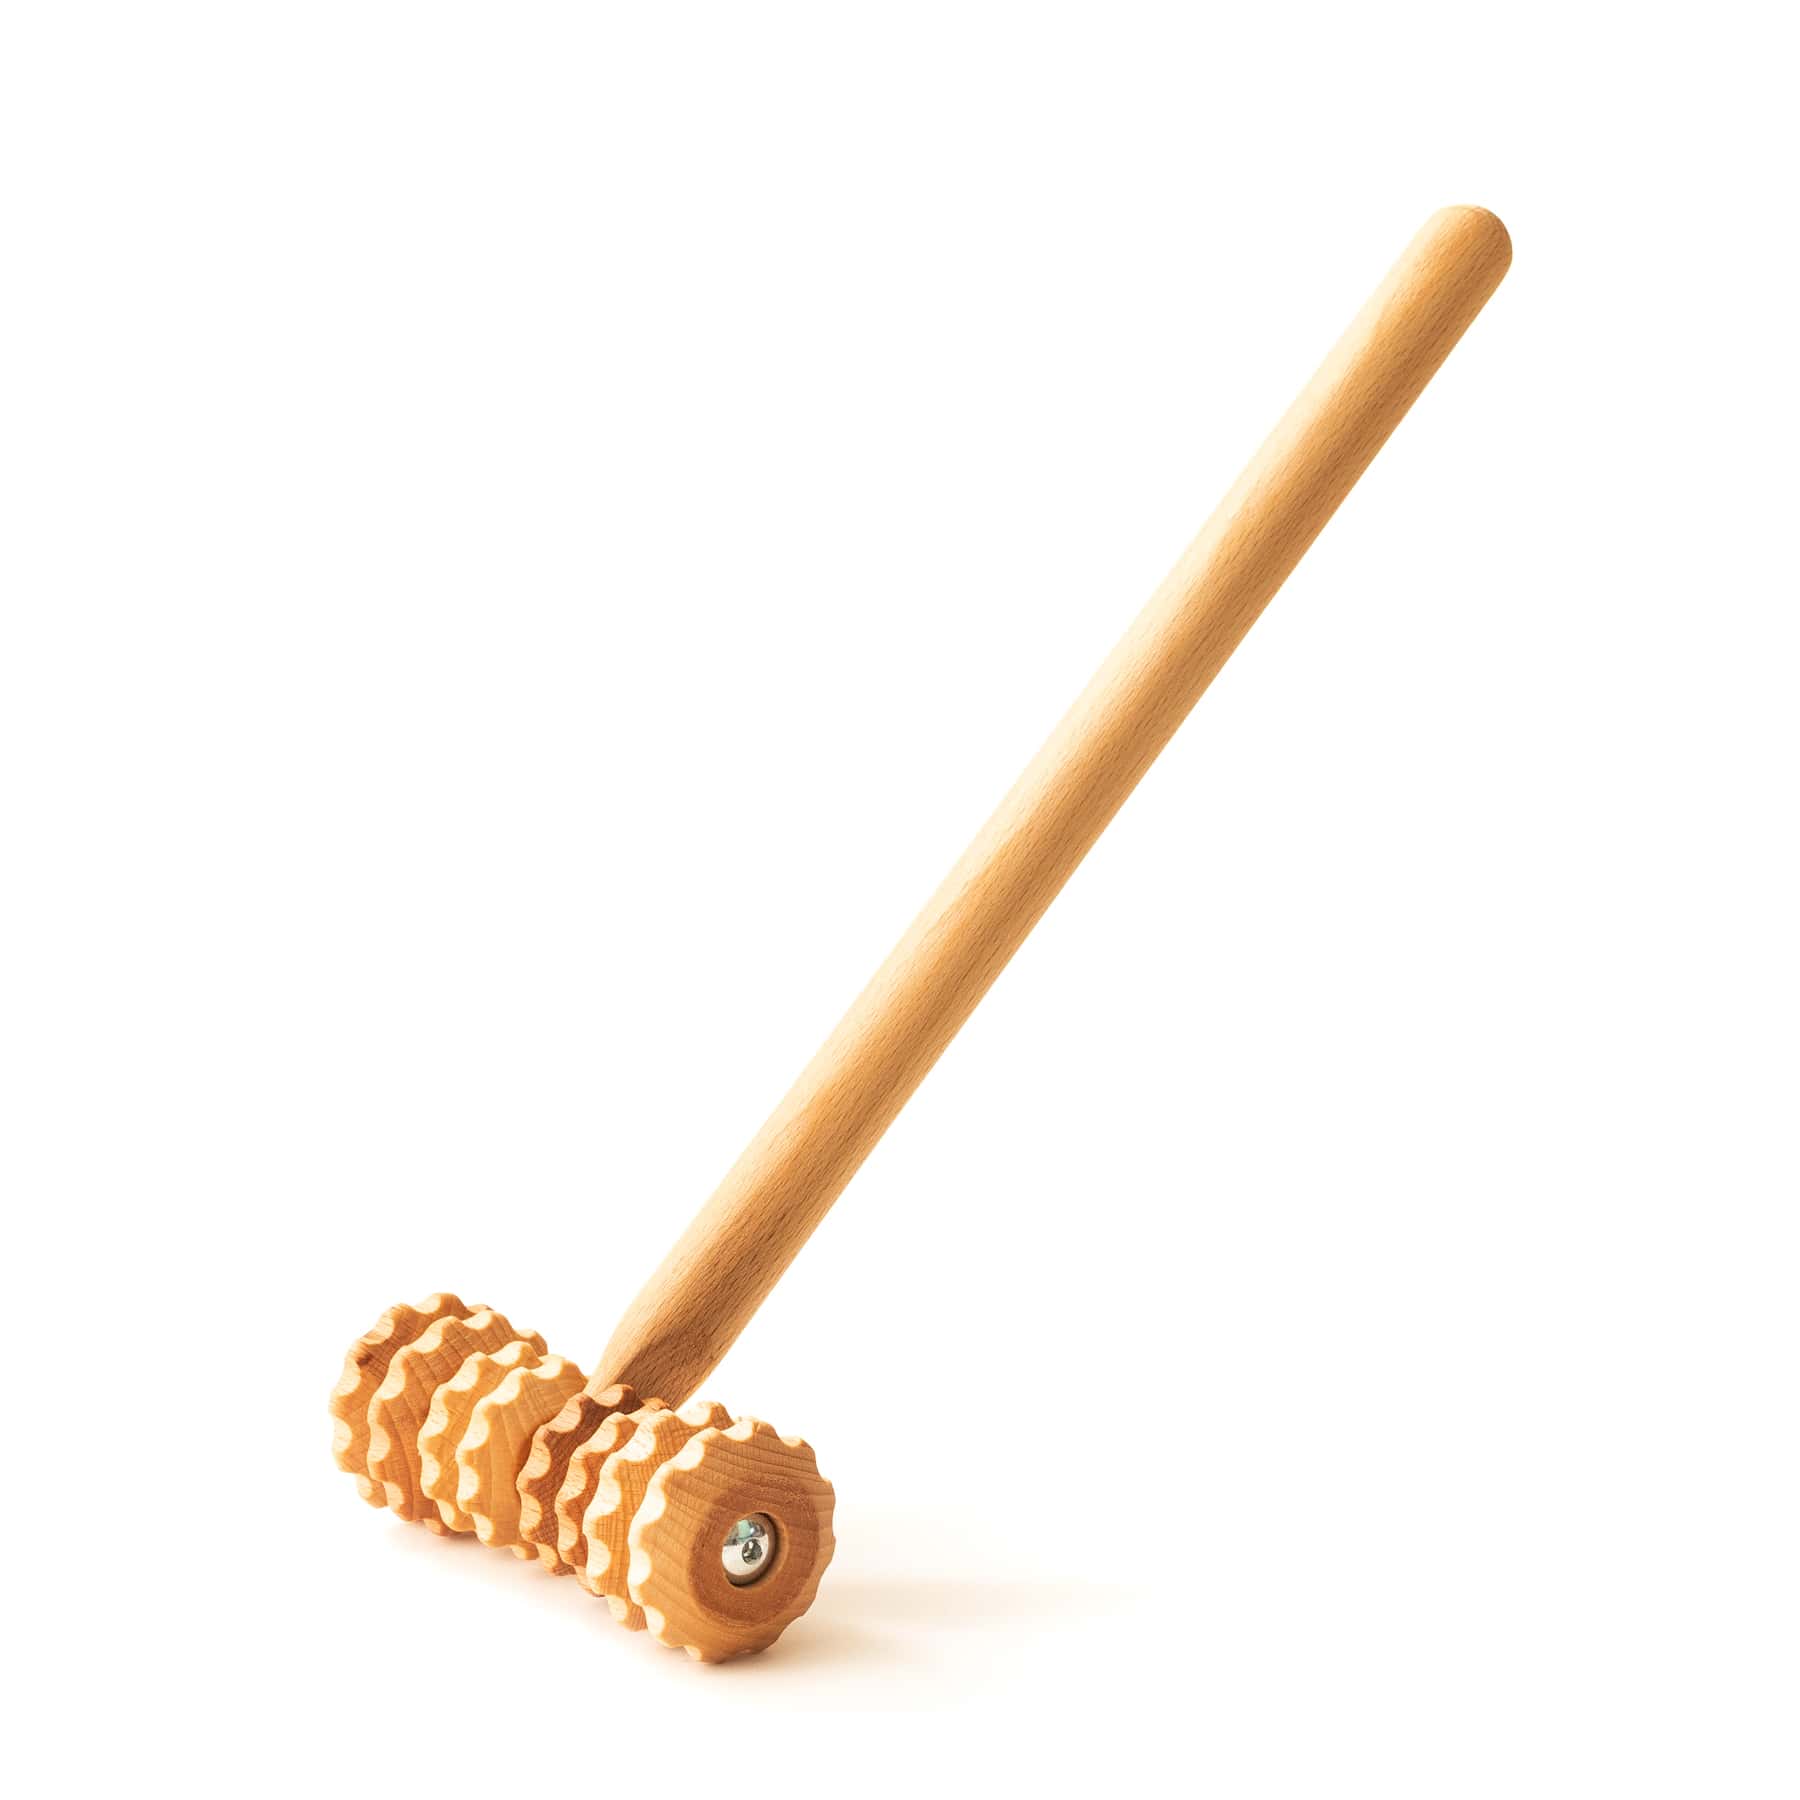 NEW! Curved Wooden Therapy Massaging Roller – The Puzzle Piece